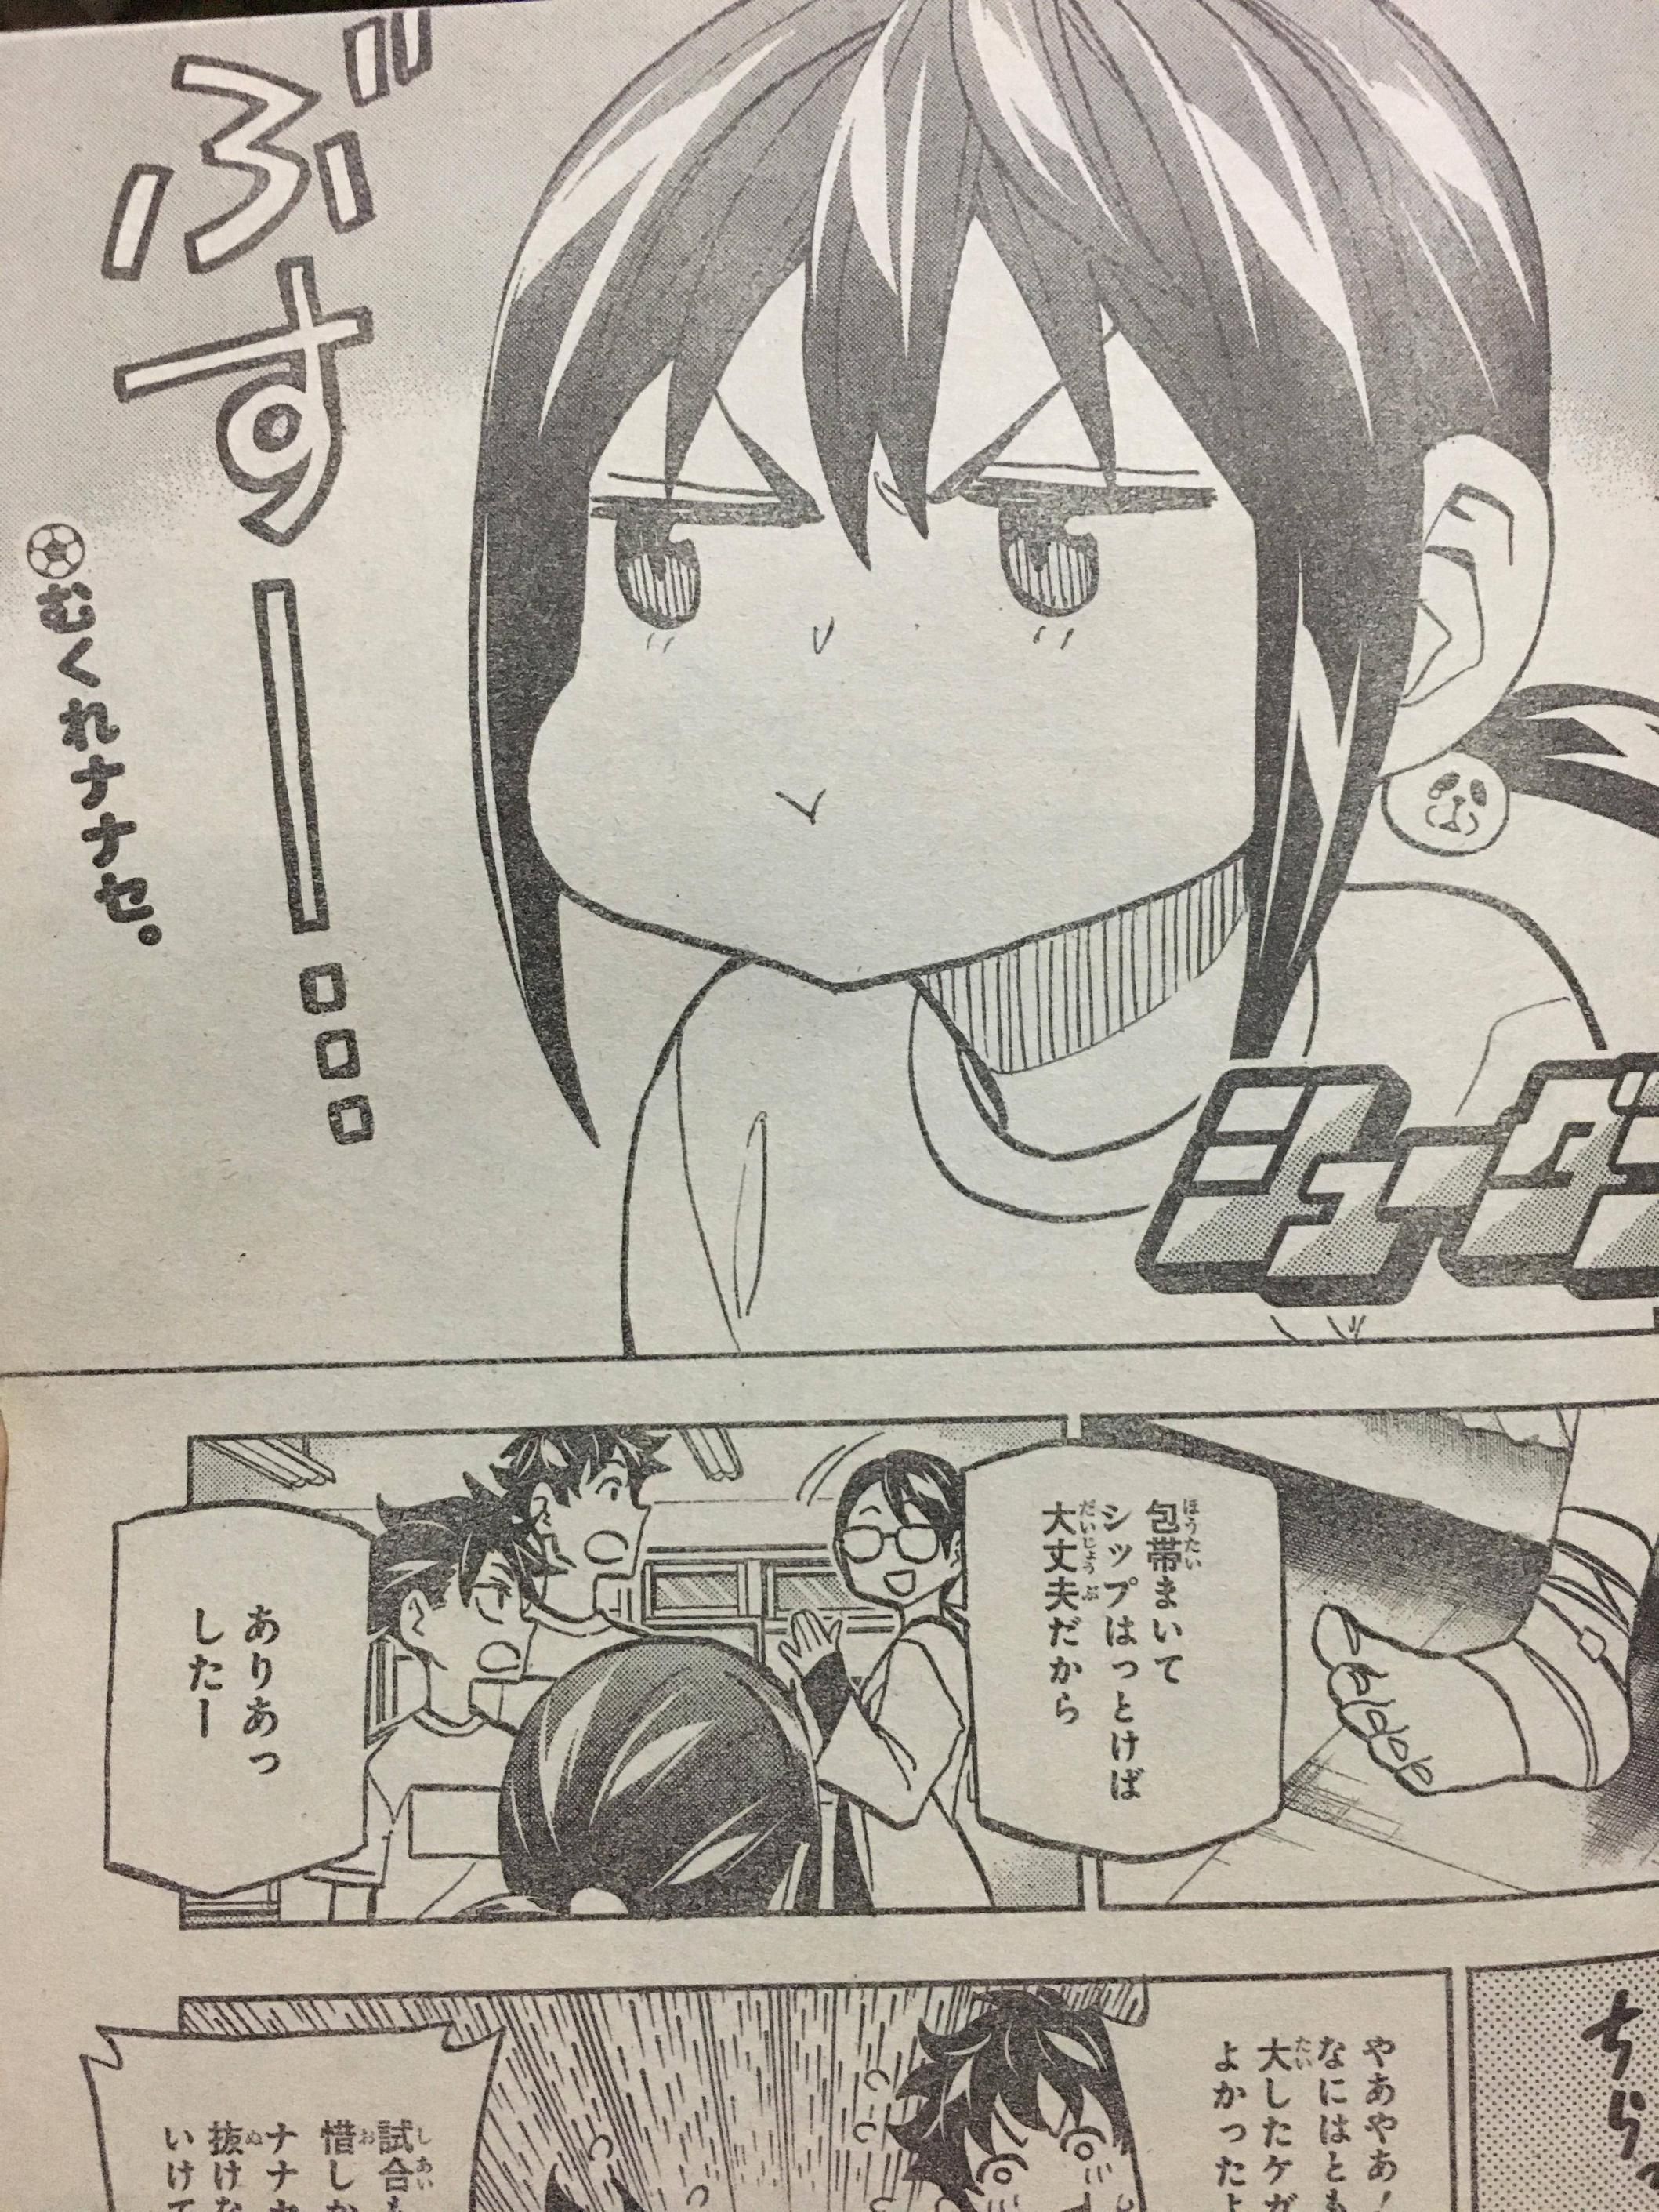 [Good news] of this week's jump "We can not study", Erotic erotic deployment 4